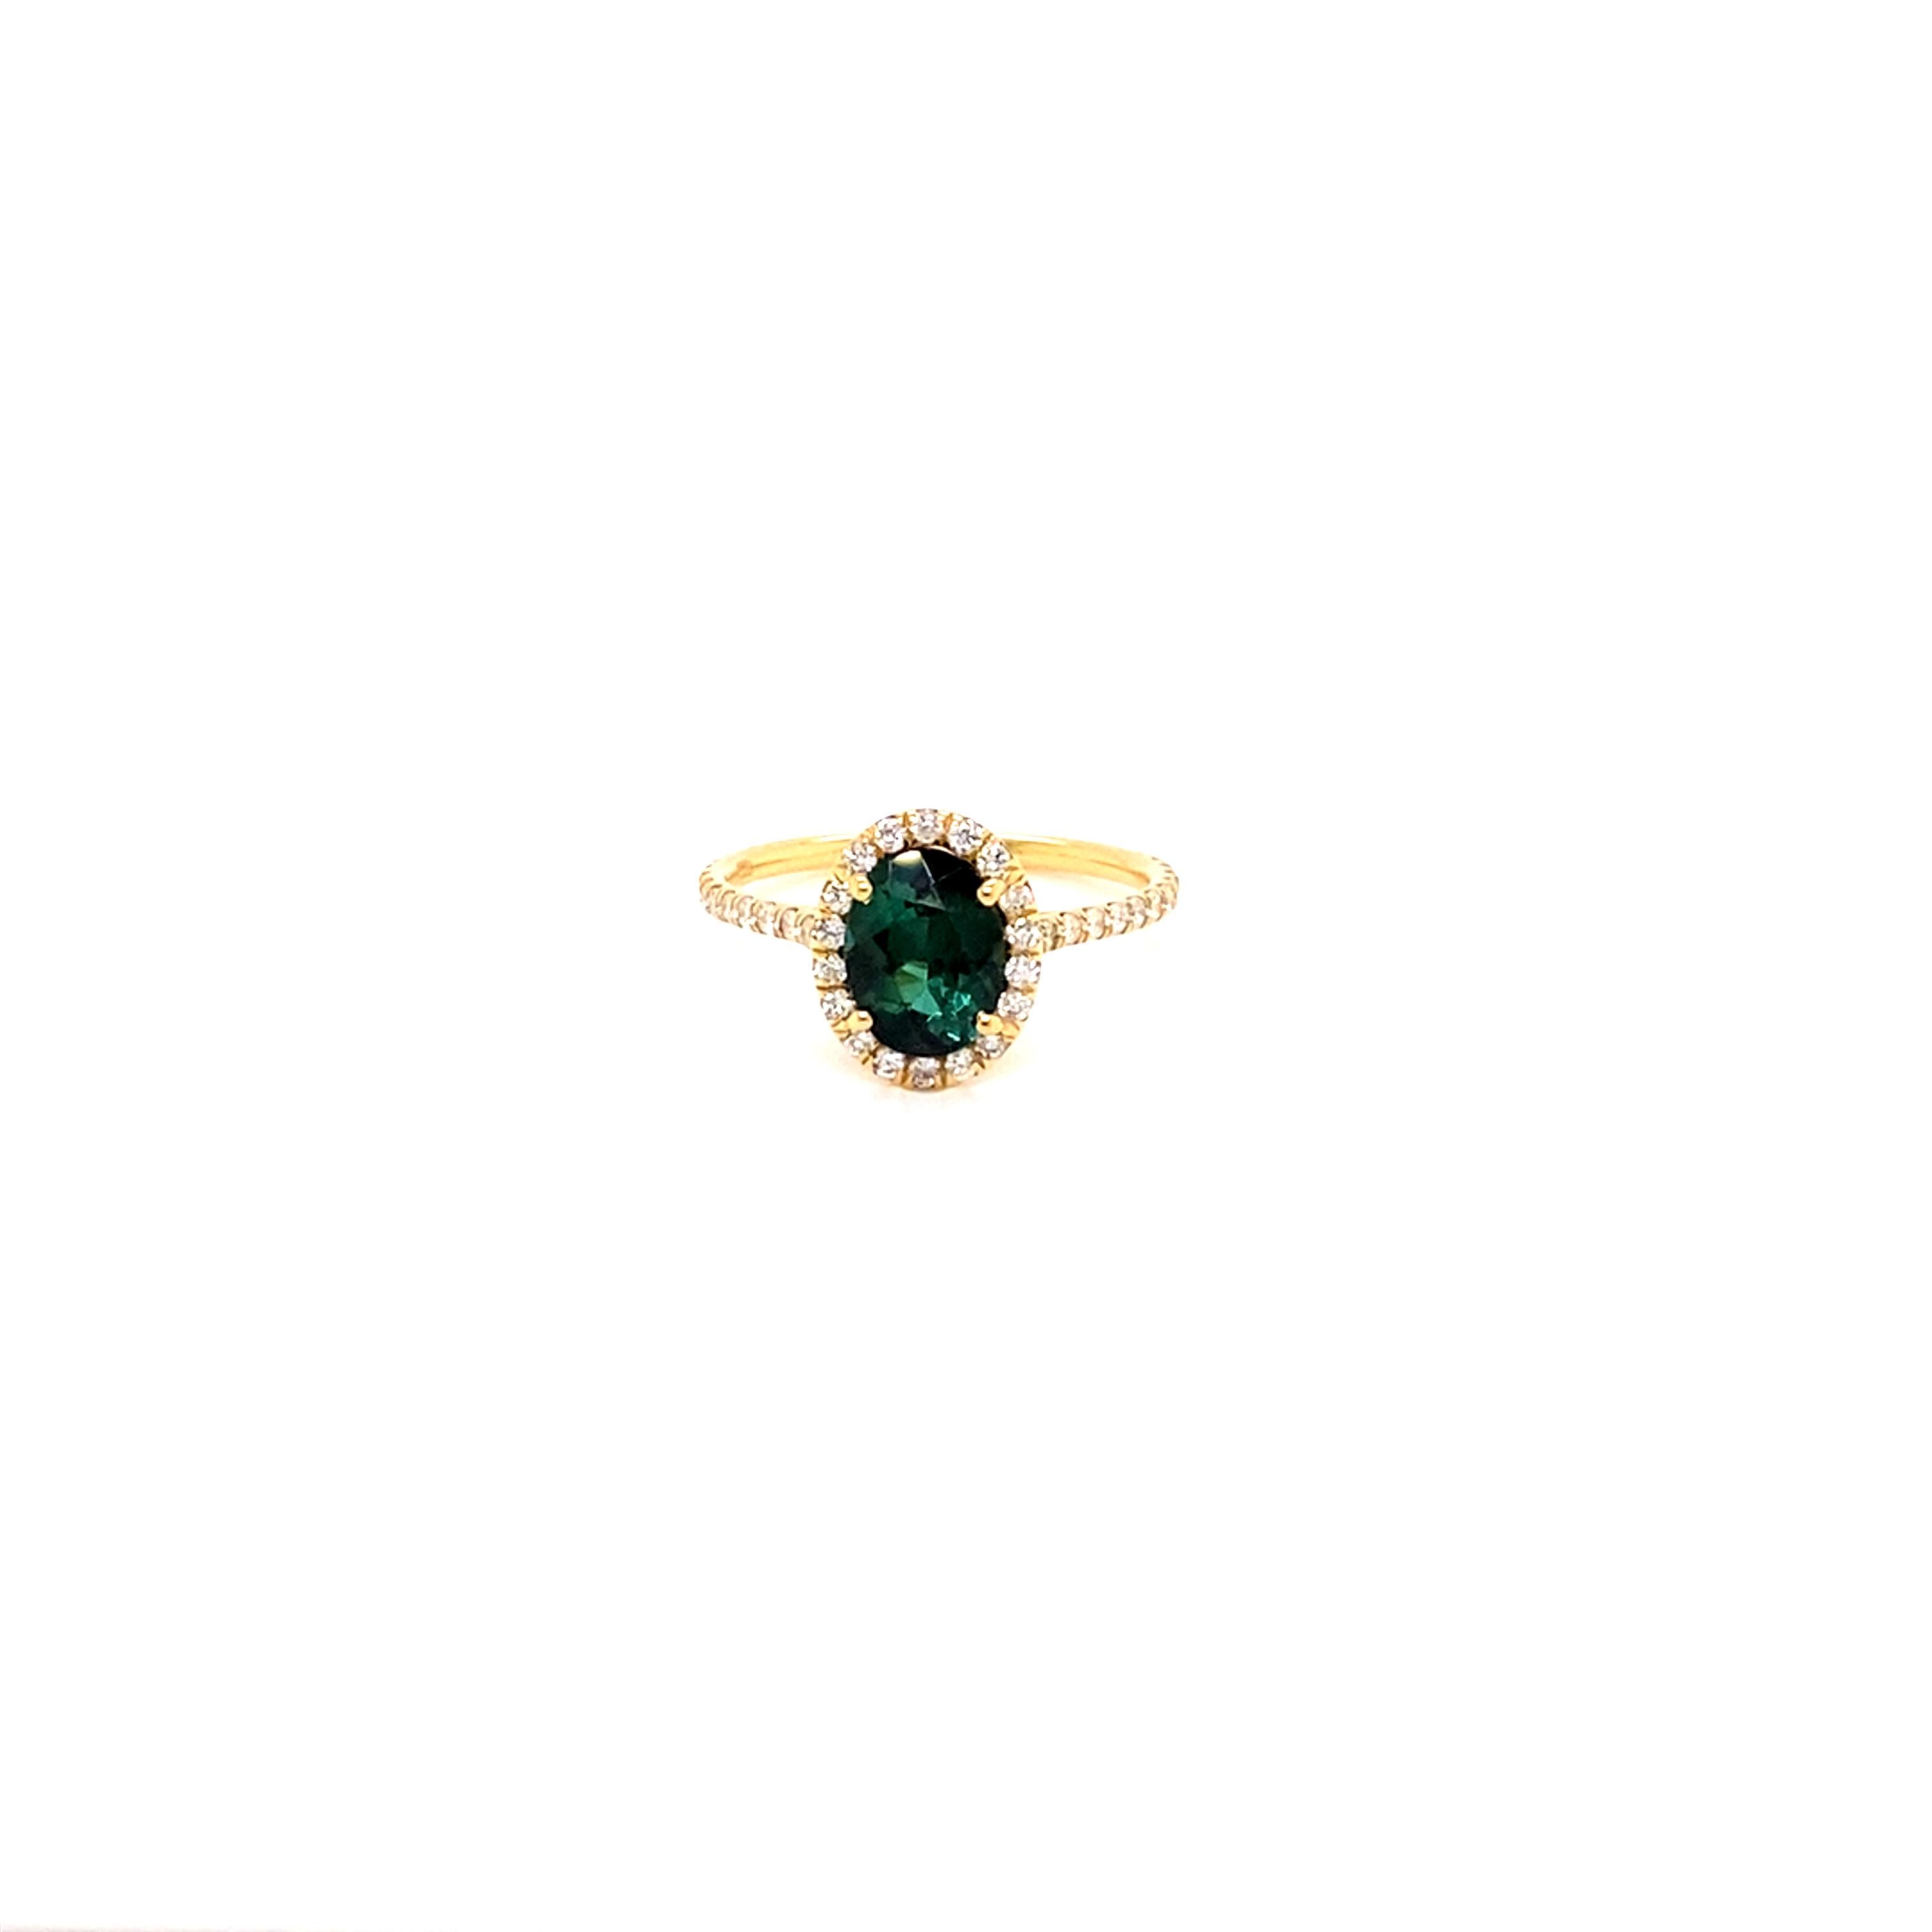 Eye Catching Oval Shaped Green Tourmaline set in a sparkling halo of diamonds in a high polish 18k Yellow Gold Ring. 

This stunning tourmaline was hand selected for its brilliance, clarity, and attractive bluish green hues. 

Handset in a delicate